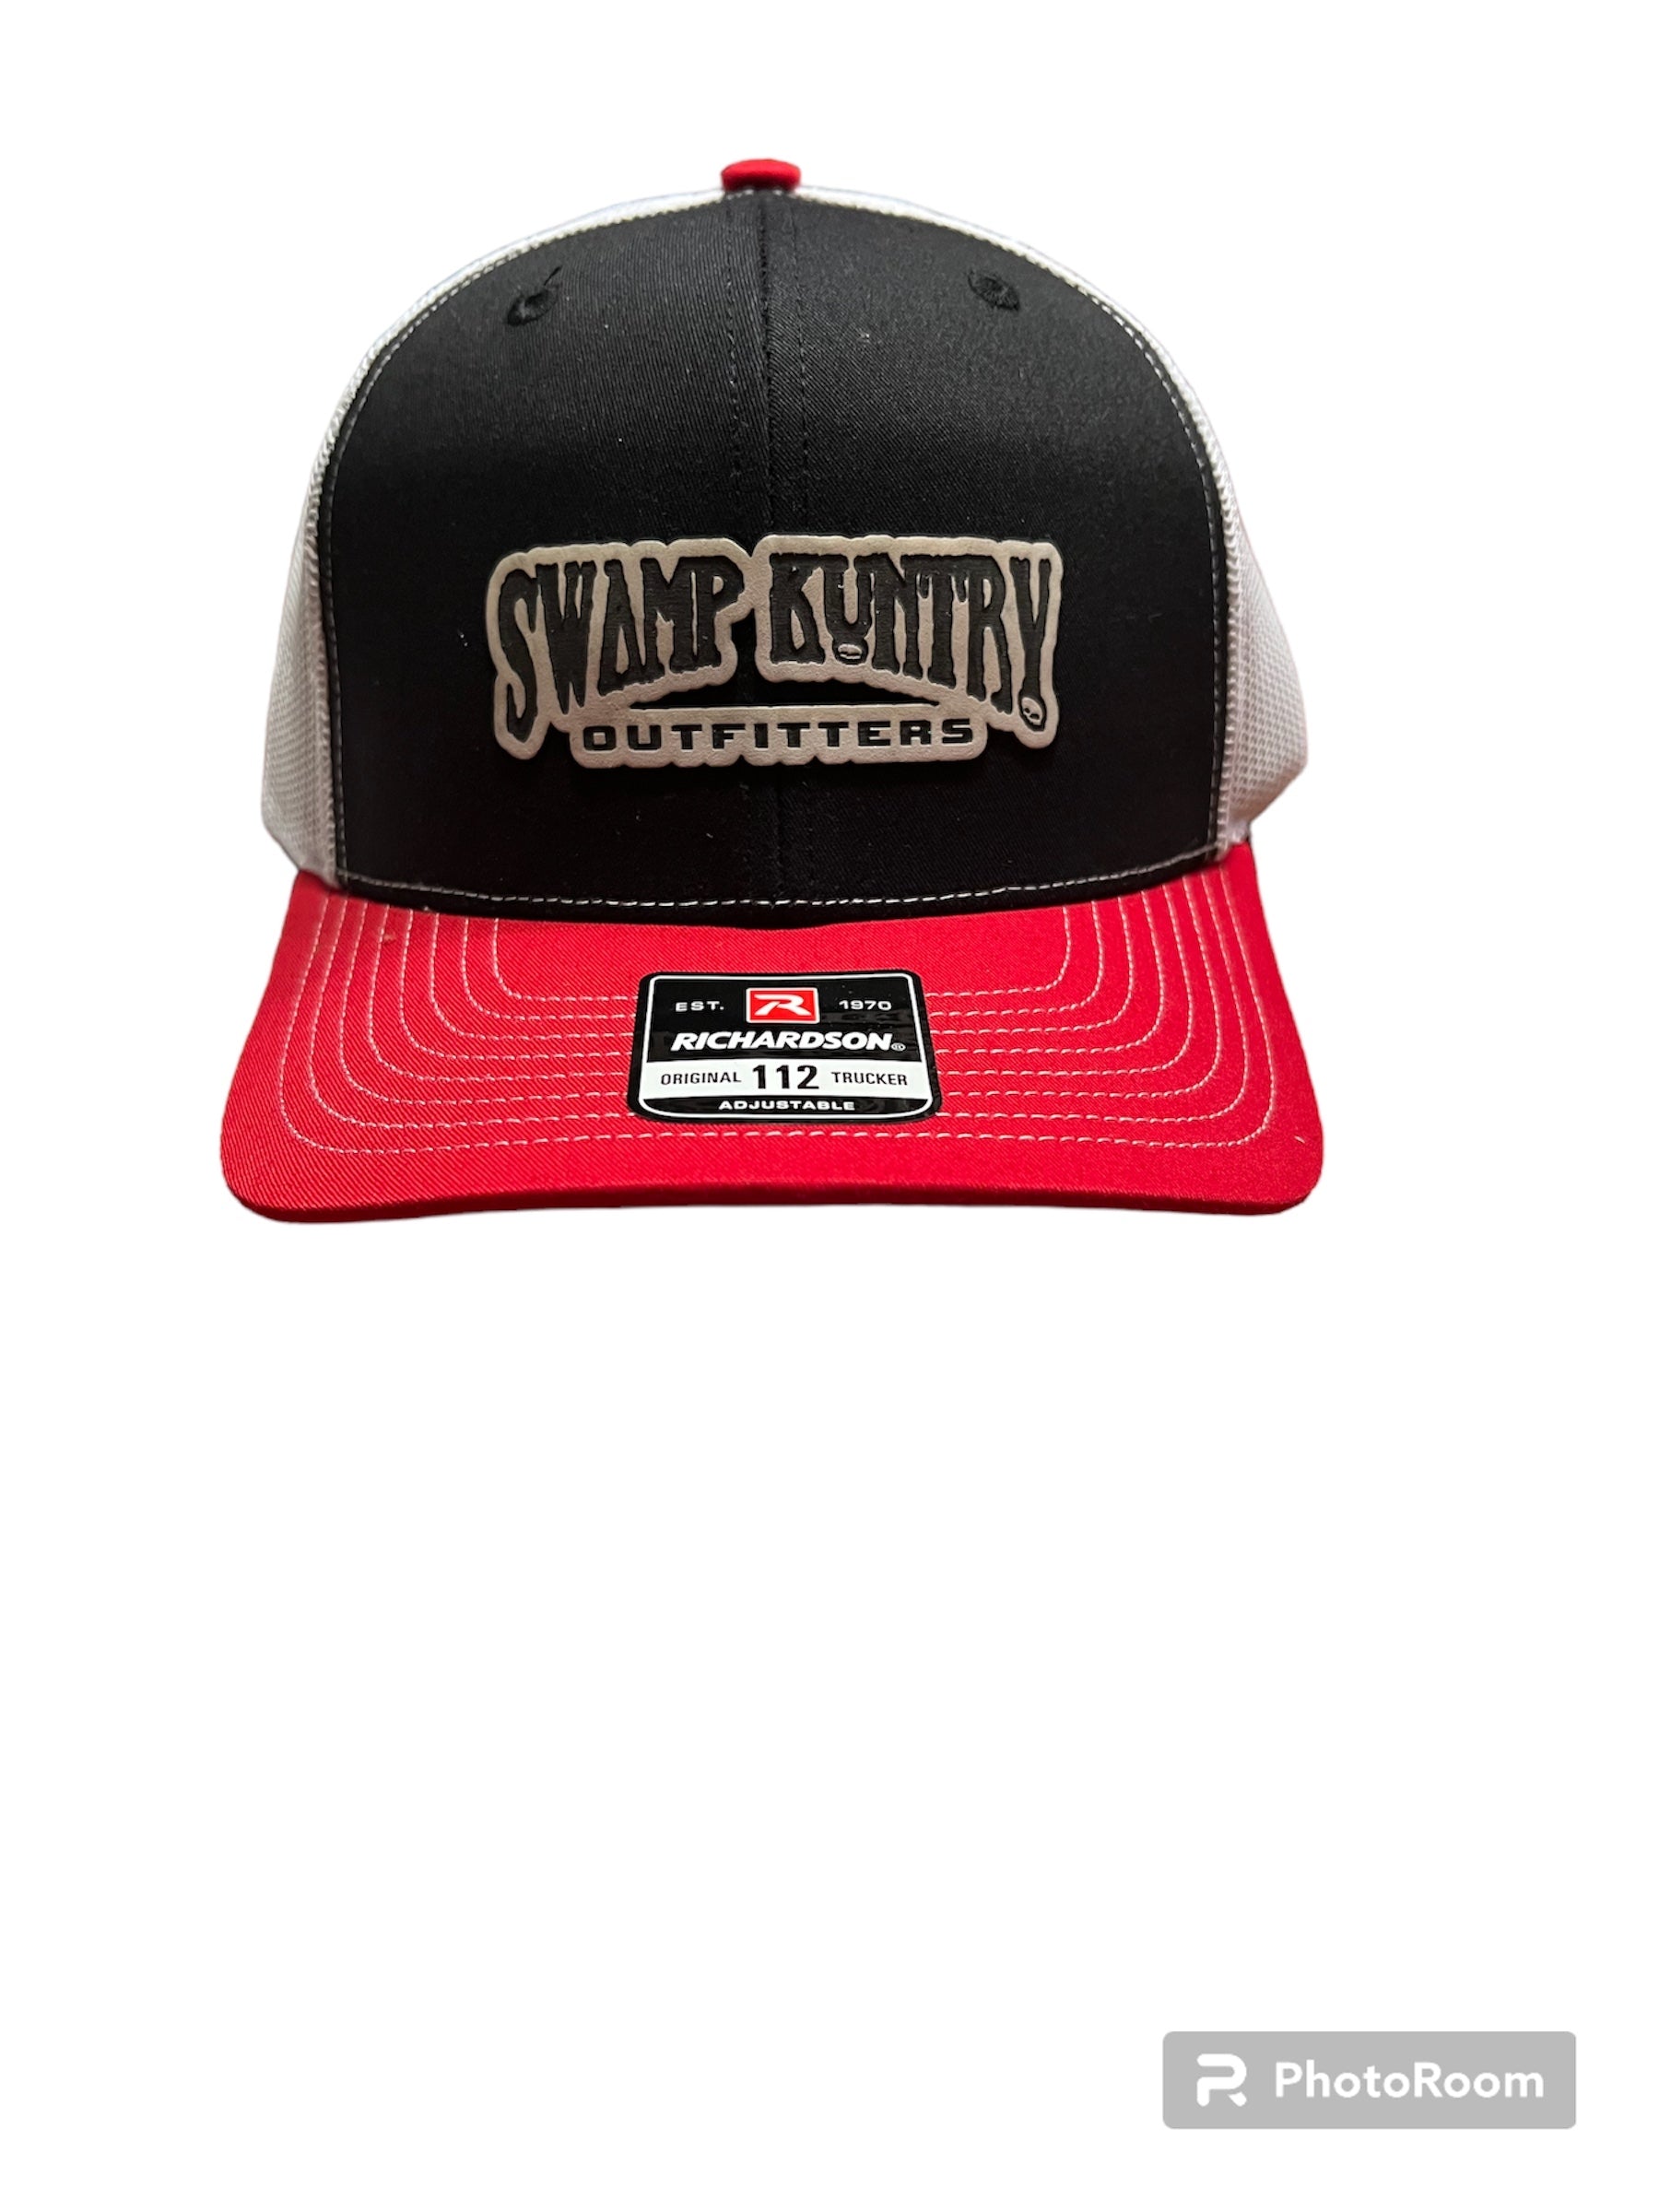 Swamp Kuntry Outfitters Logo Hat